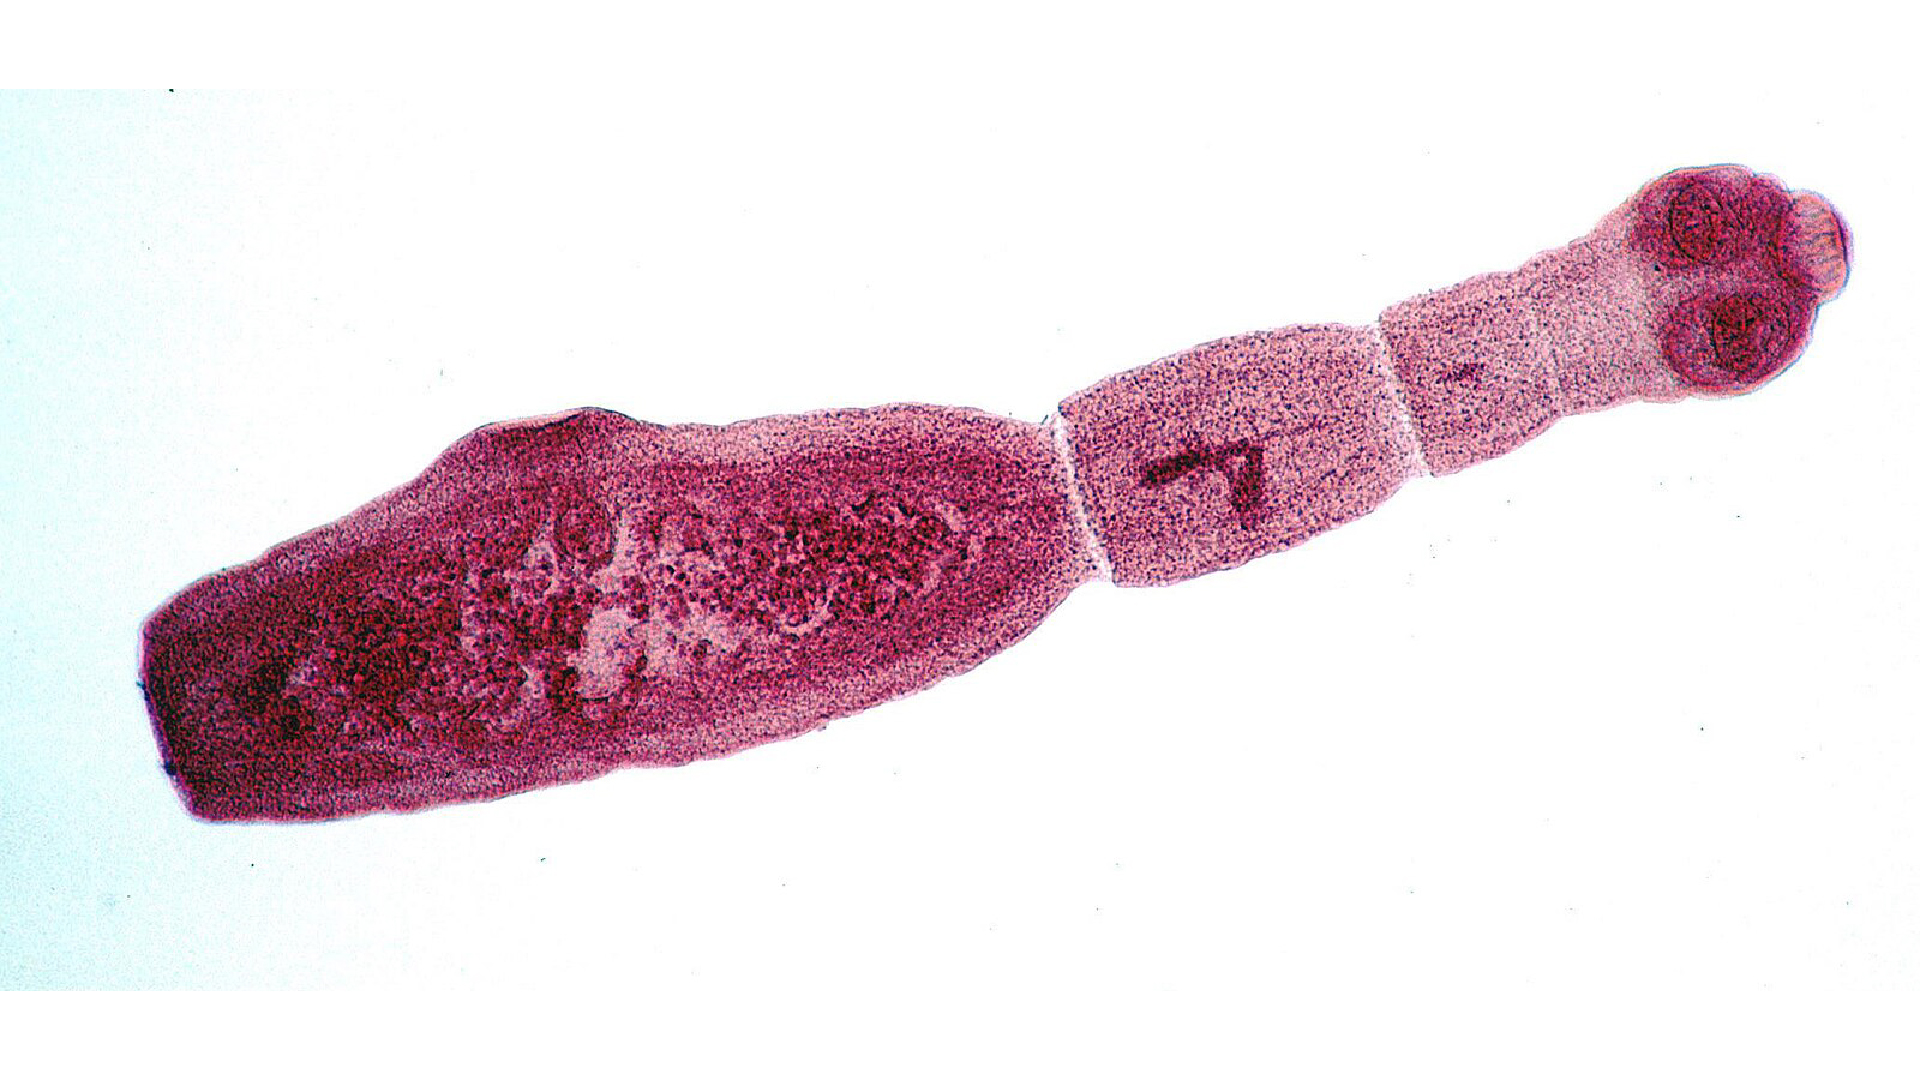 A laboratory image of an adult tapeworm